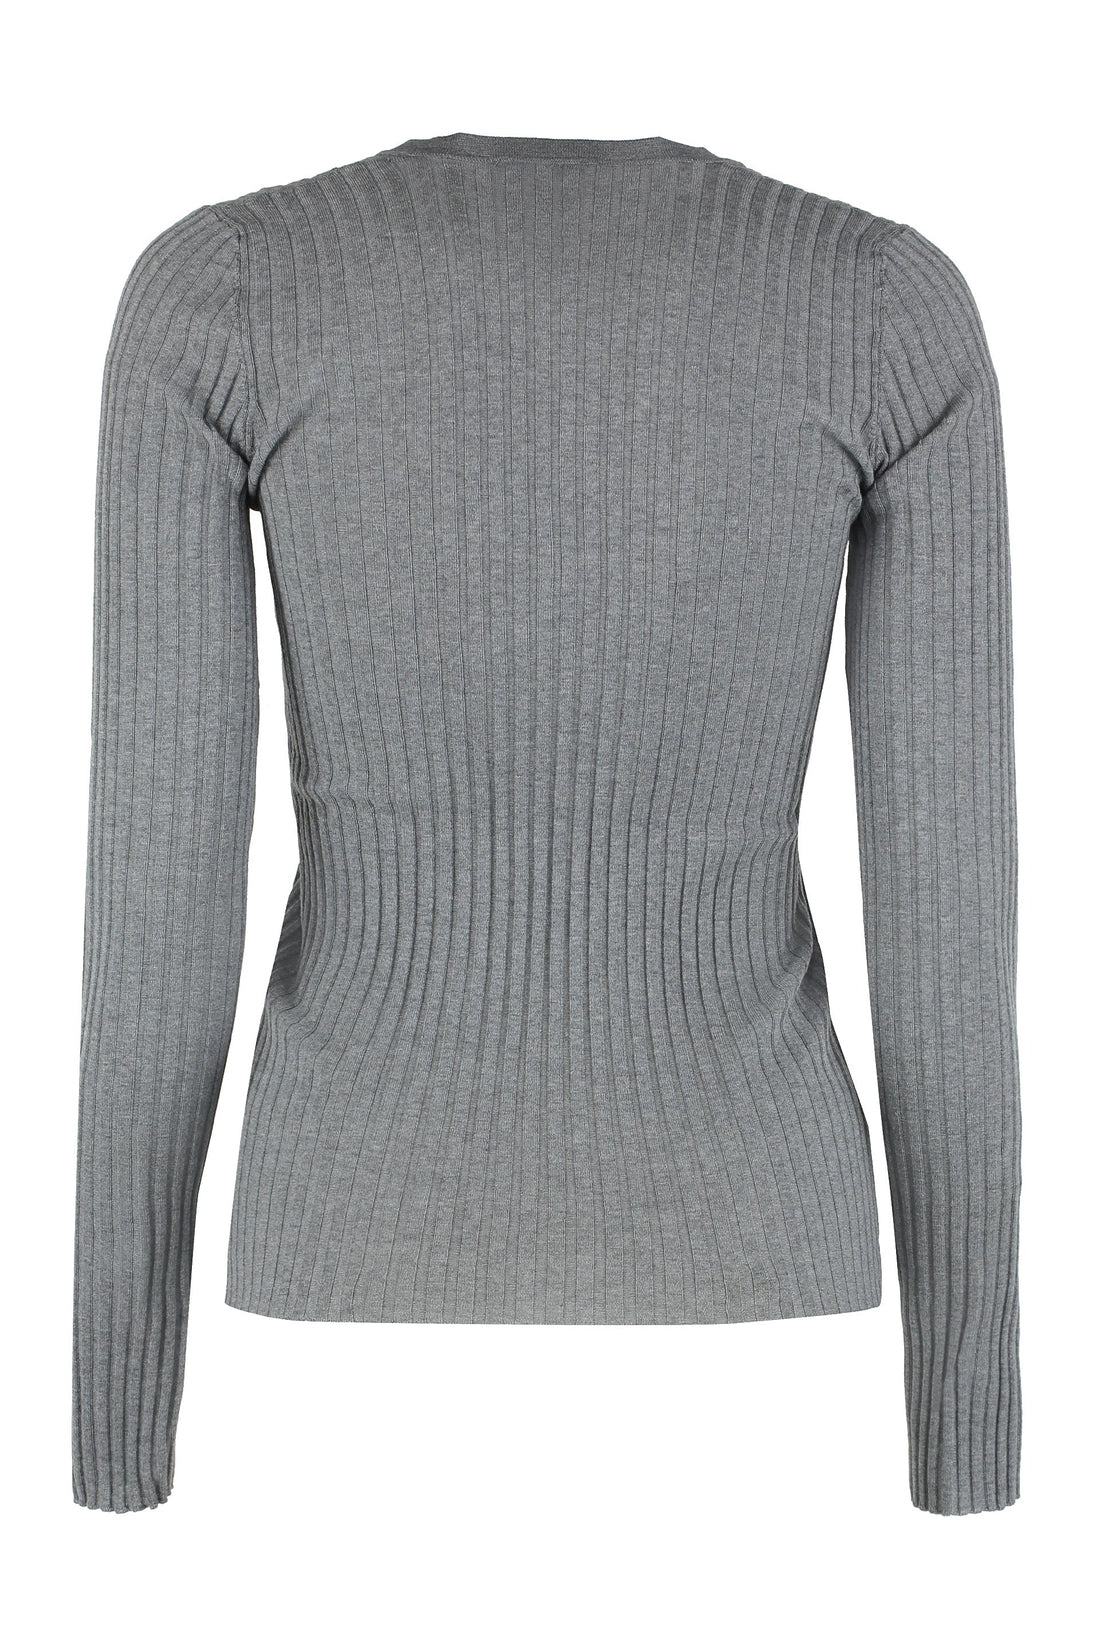 Roberto Collina-OUTLET-SALE-Long-sleeved top-ARCHIVIST